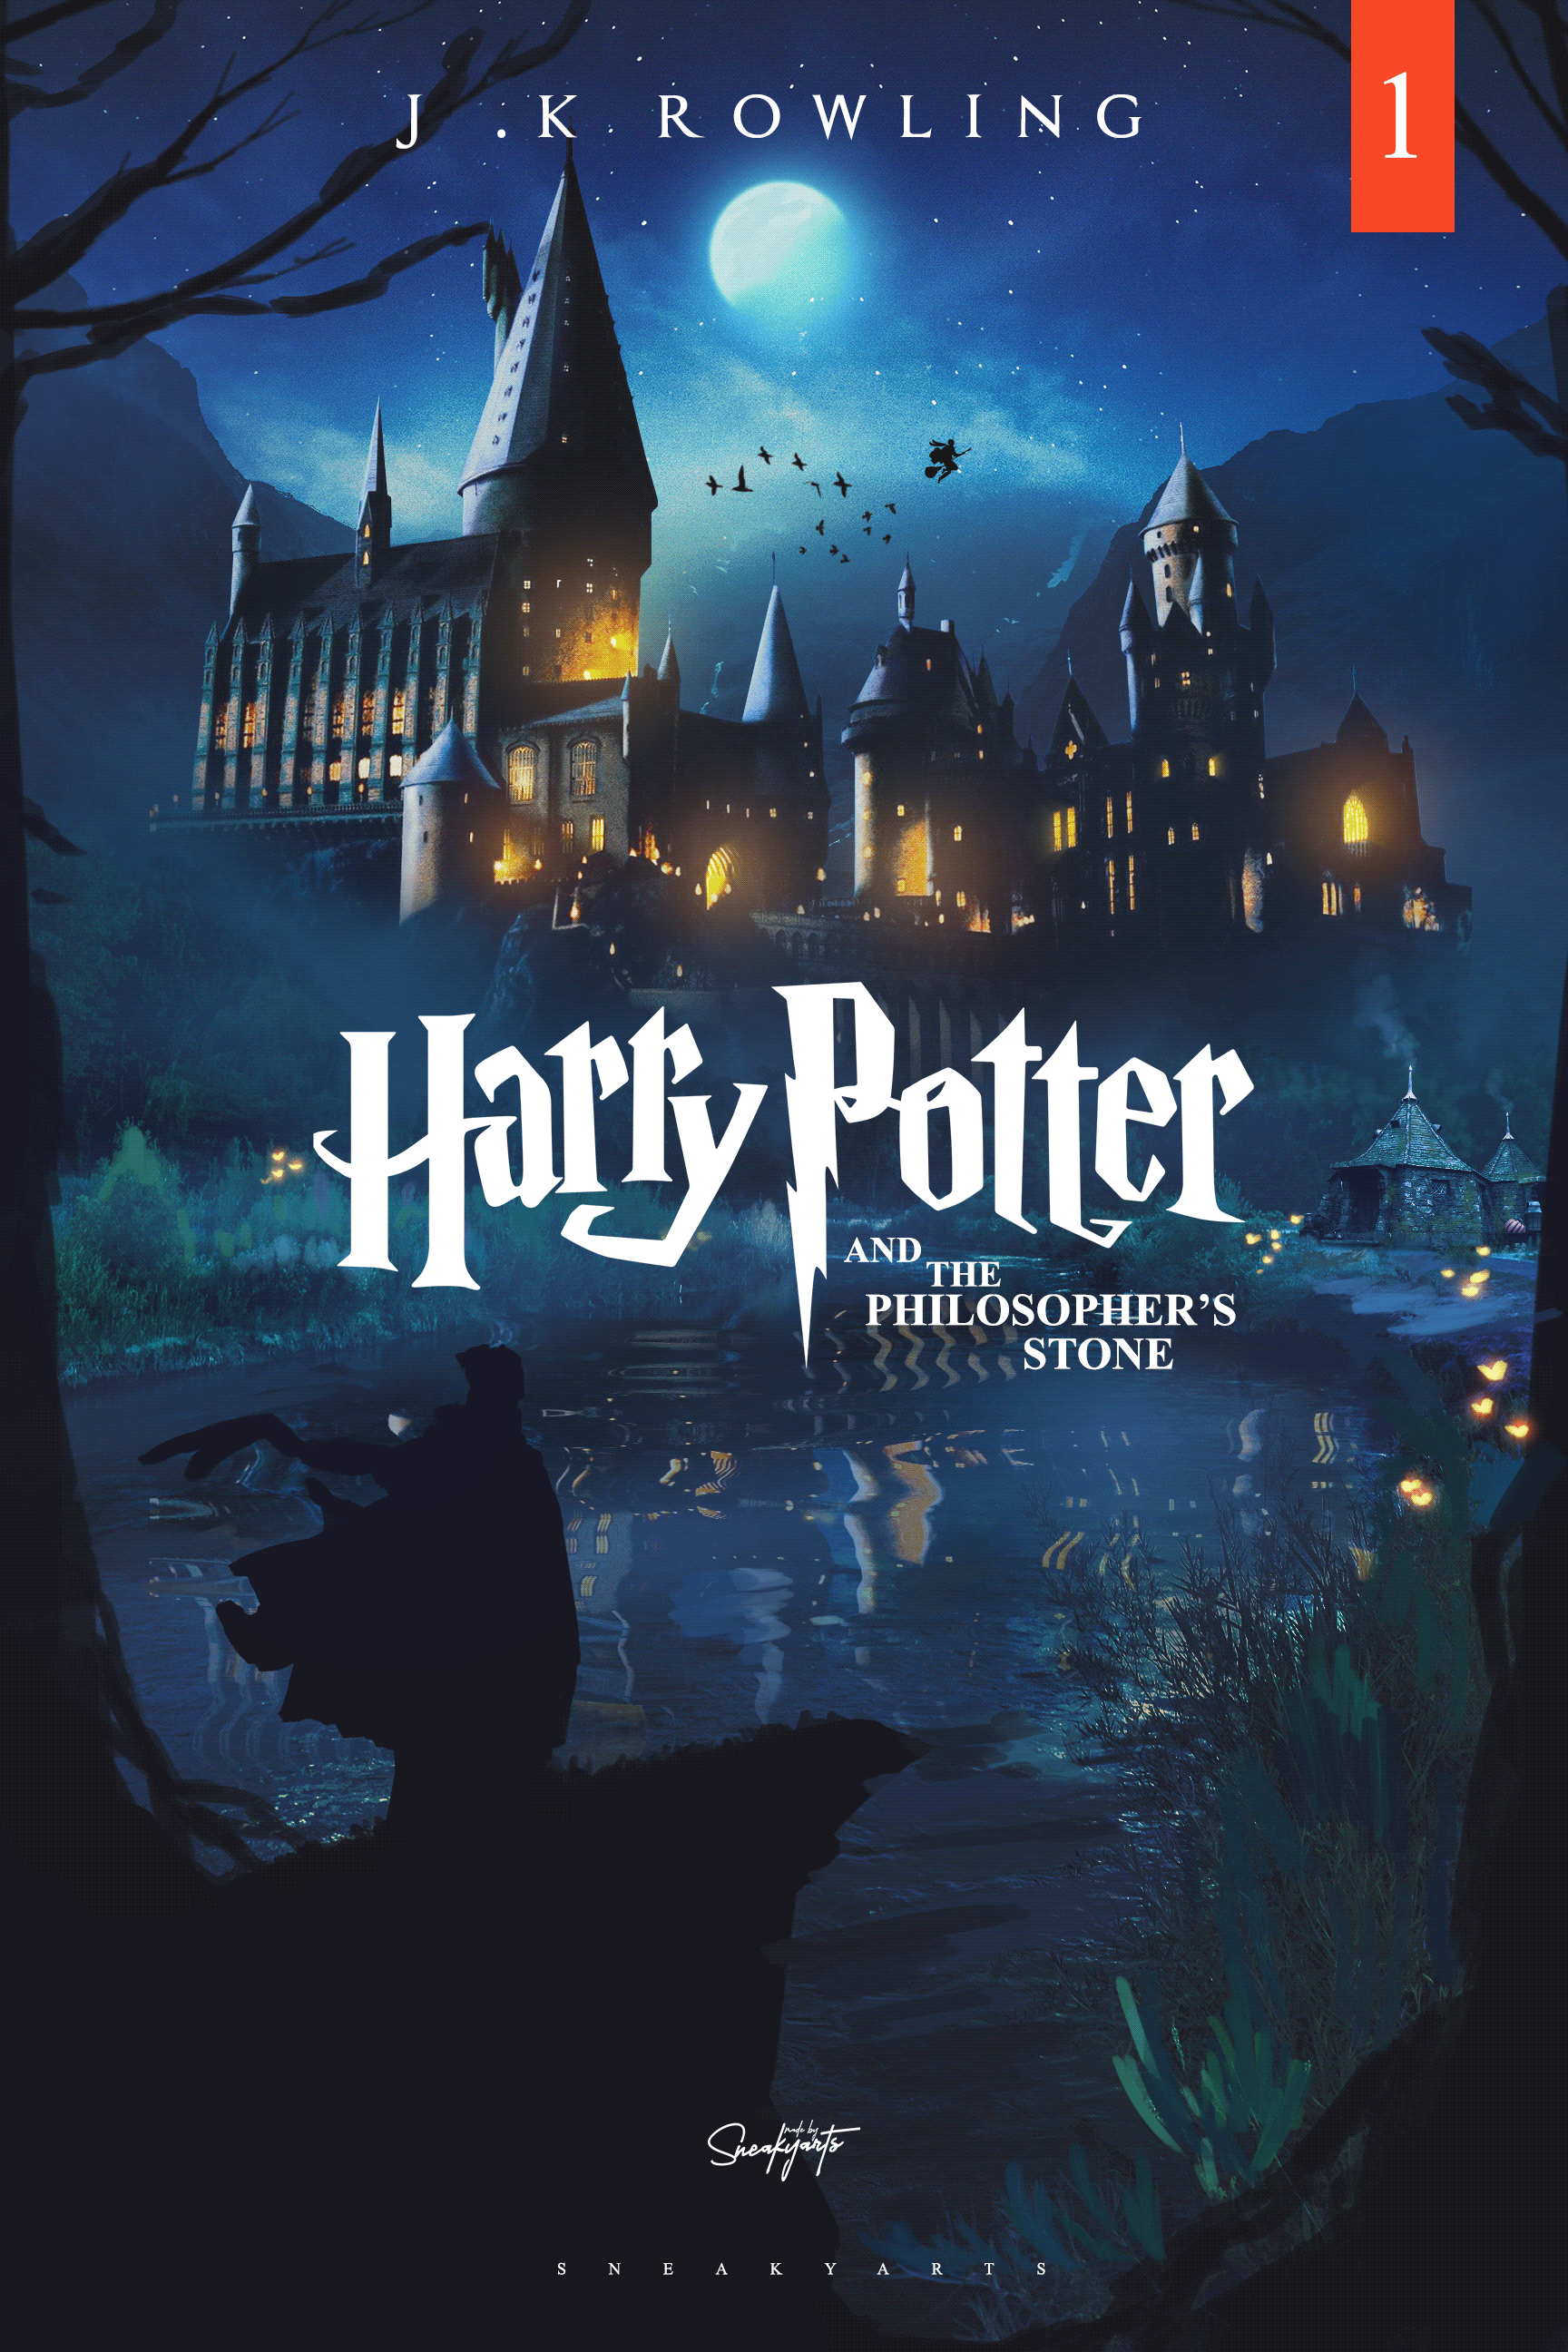 Harry Potter and the Philosopher's Stone on Behance